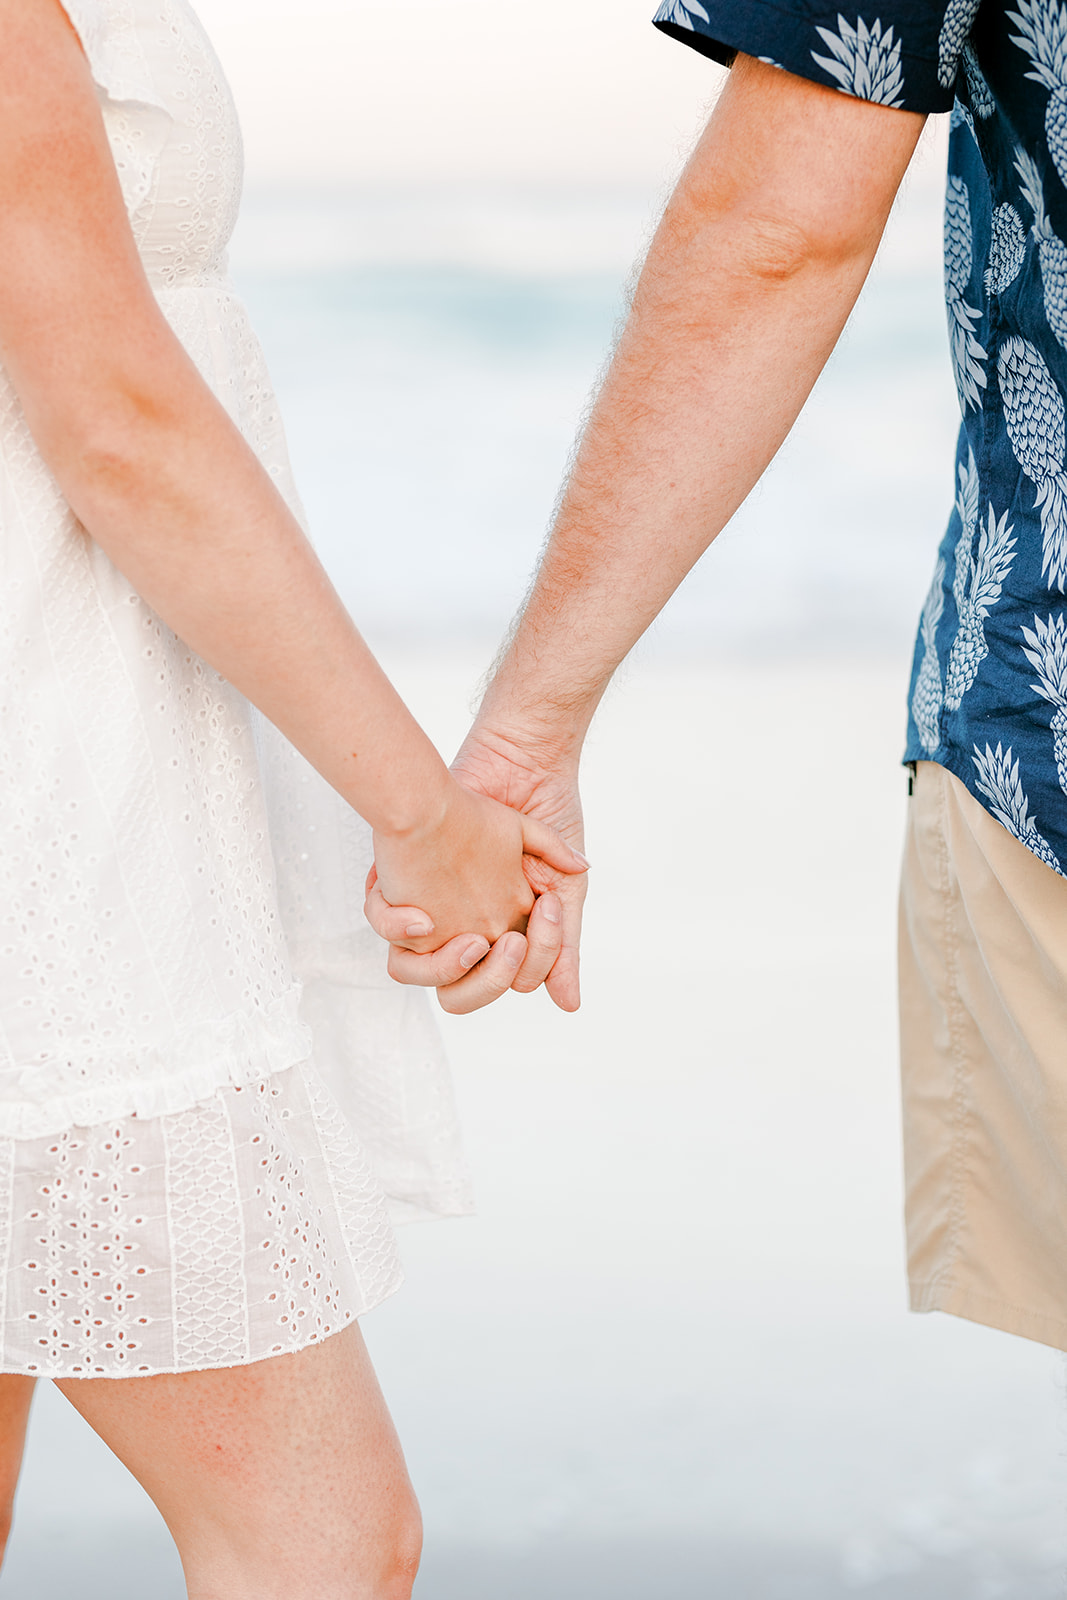 Couple holding hands on the beach in Wilmington, North Carolina